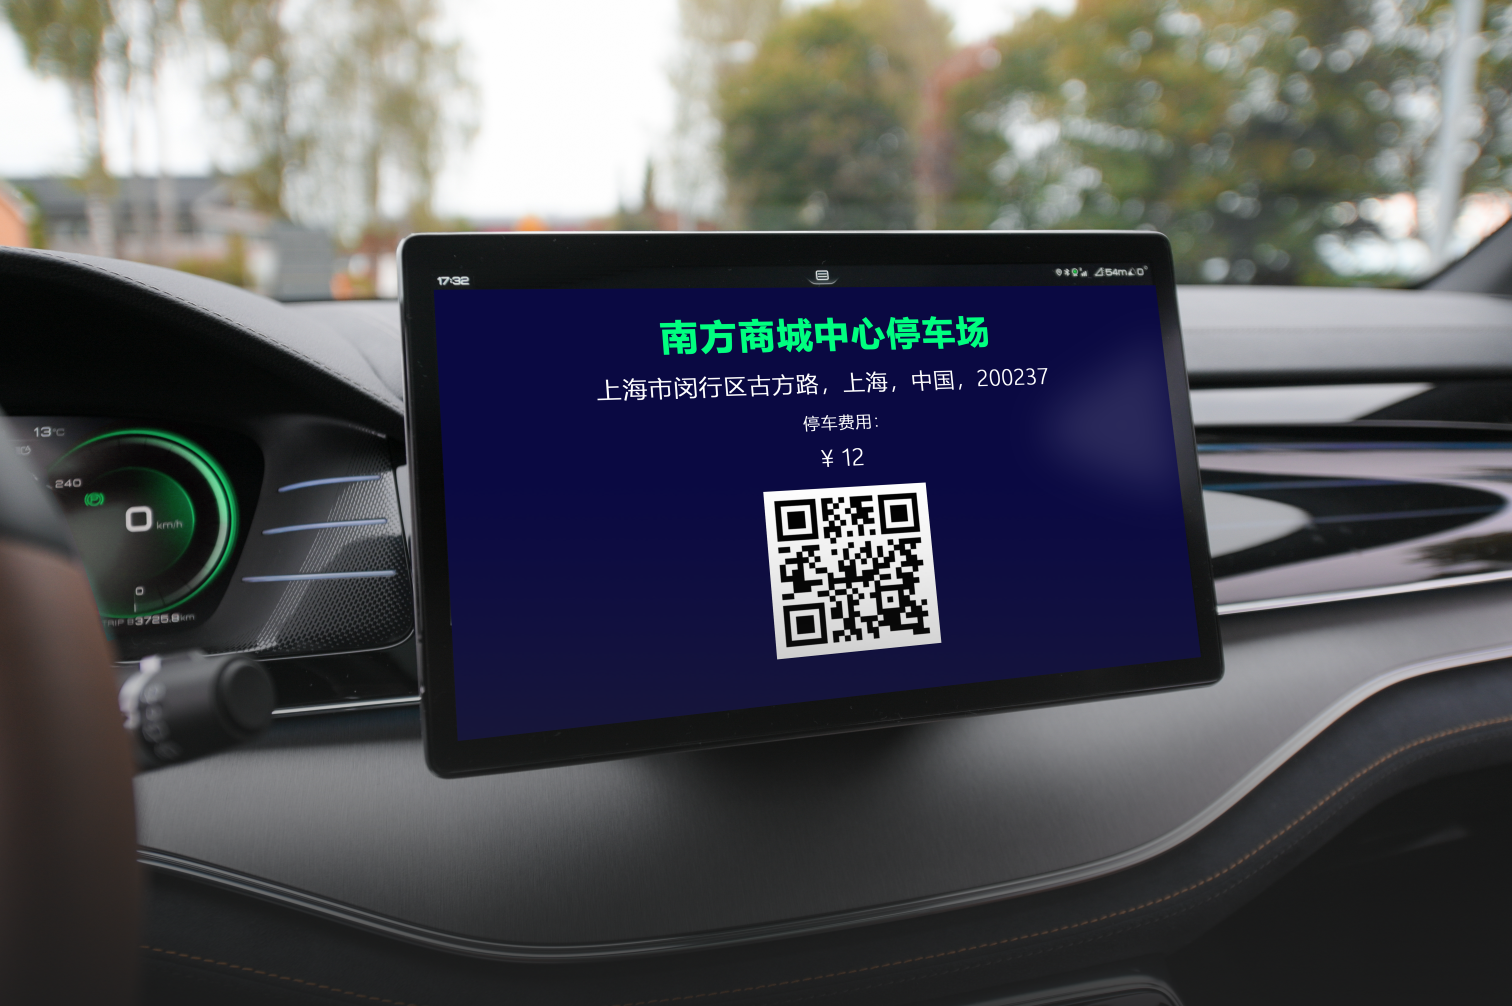 Drivers will benefit from Parkopedia’s industry-leading on-street and off-street parking data, as well as payments via in-vehicle QR codes